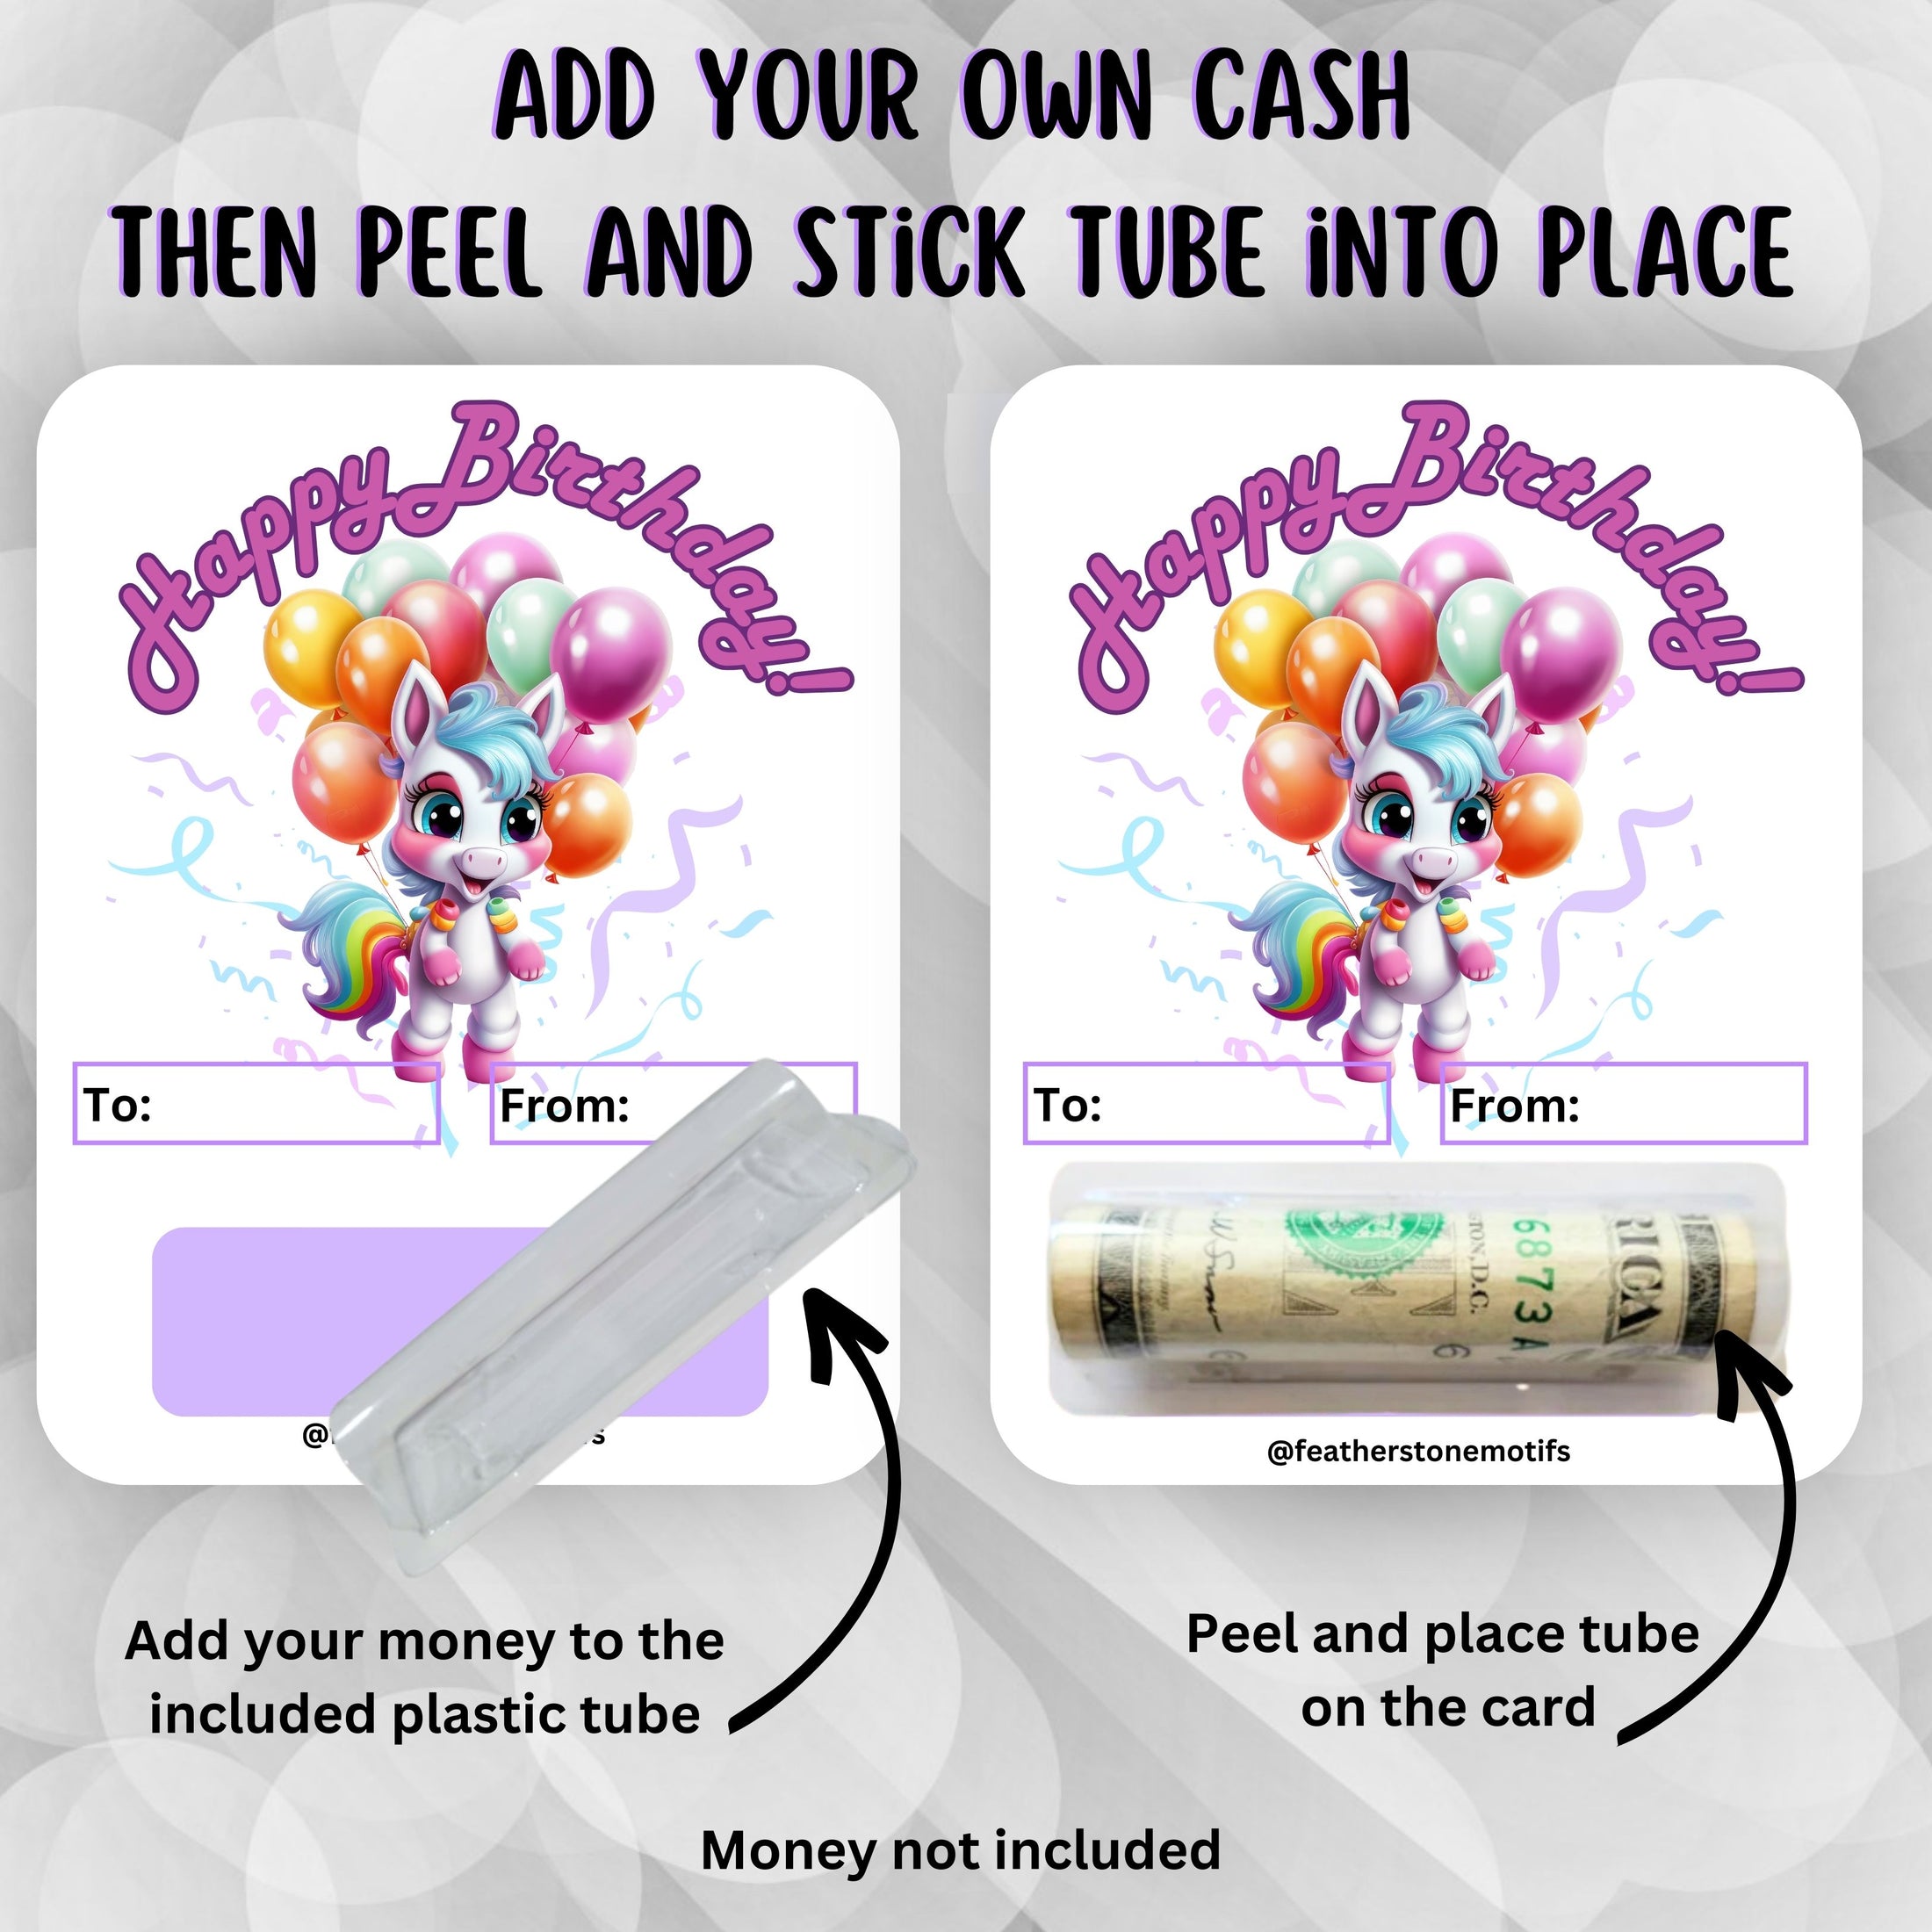 This image shows how to attach the money tube to the Birthday Pony money card.